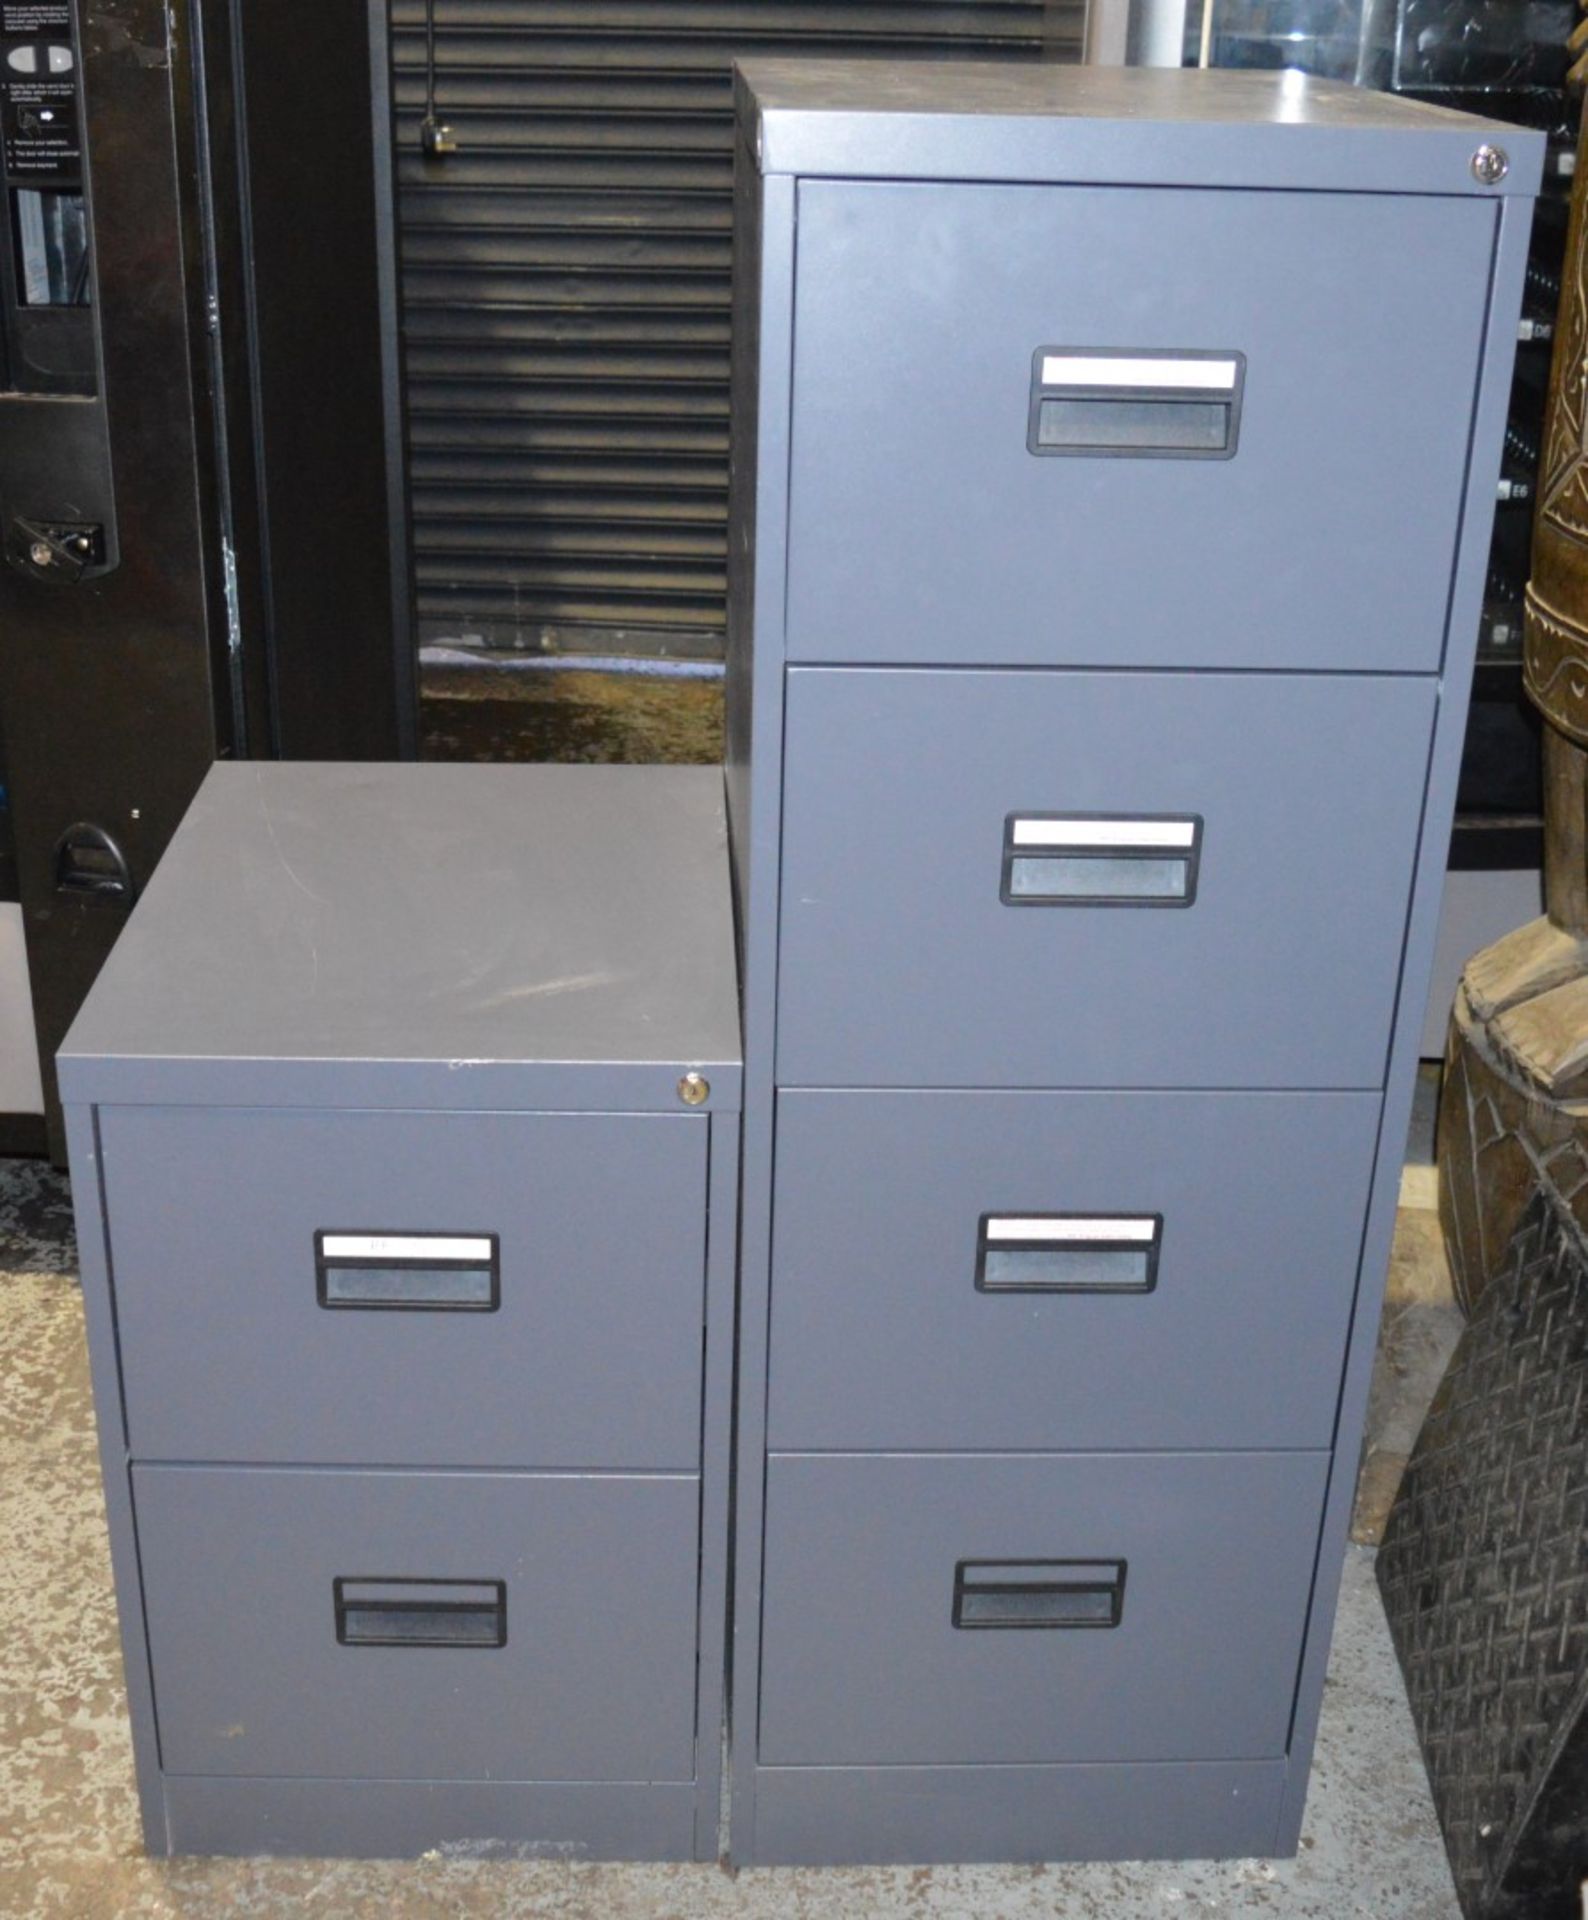 2 x Modern Grey Office Filing Cabinets - H132/71 x W46 x D62 cms - Keys not included - CL282 - Ref